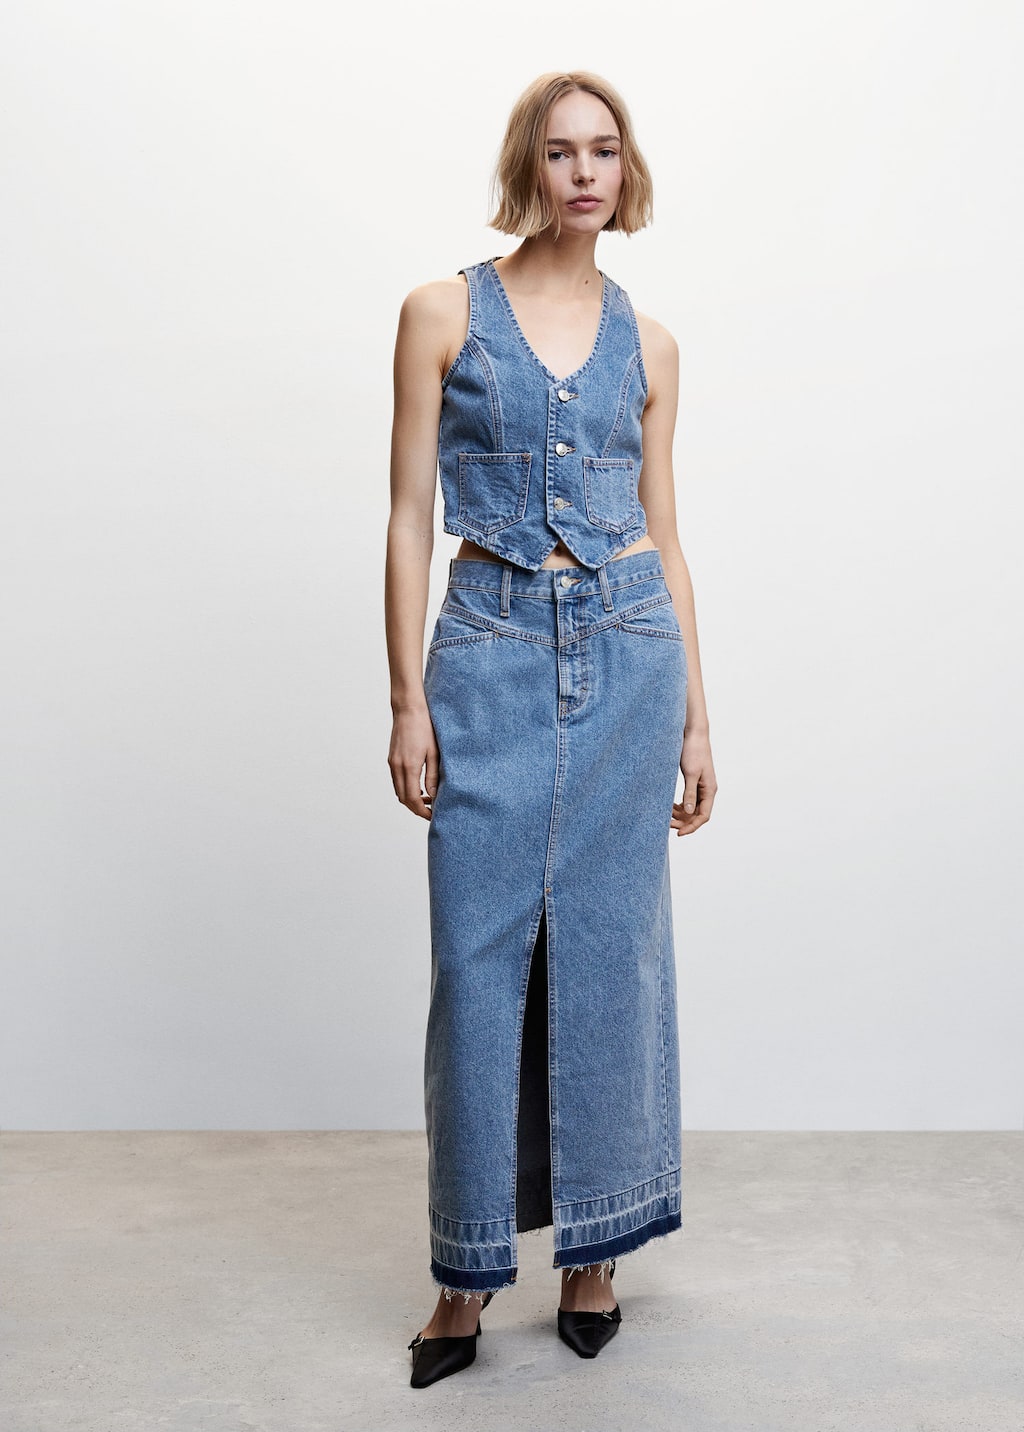 The Denim Maxi Skirt is Spring Summer’s Biggest Trend – I’ve Found the Best on the High Street